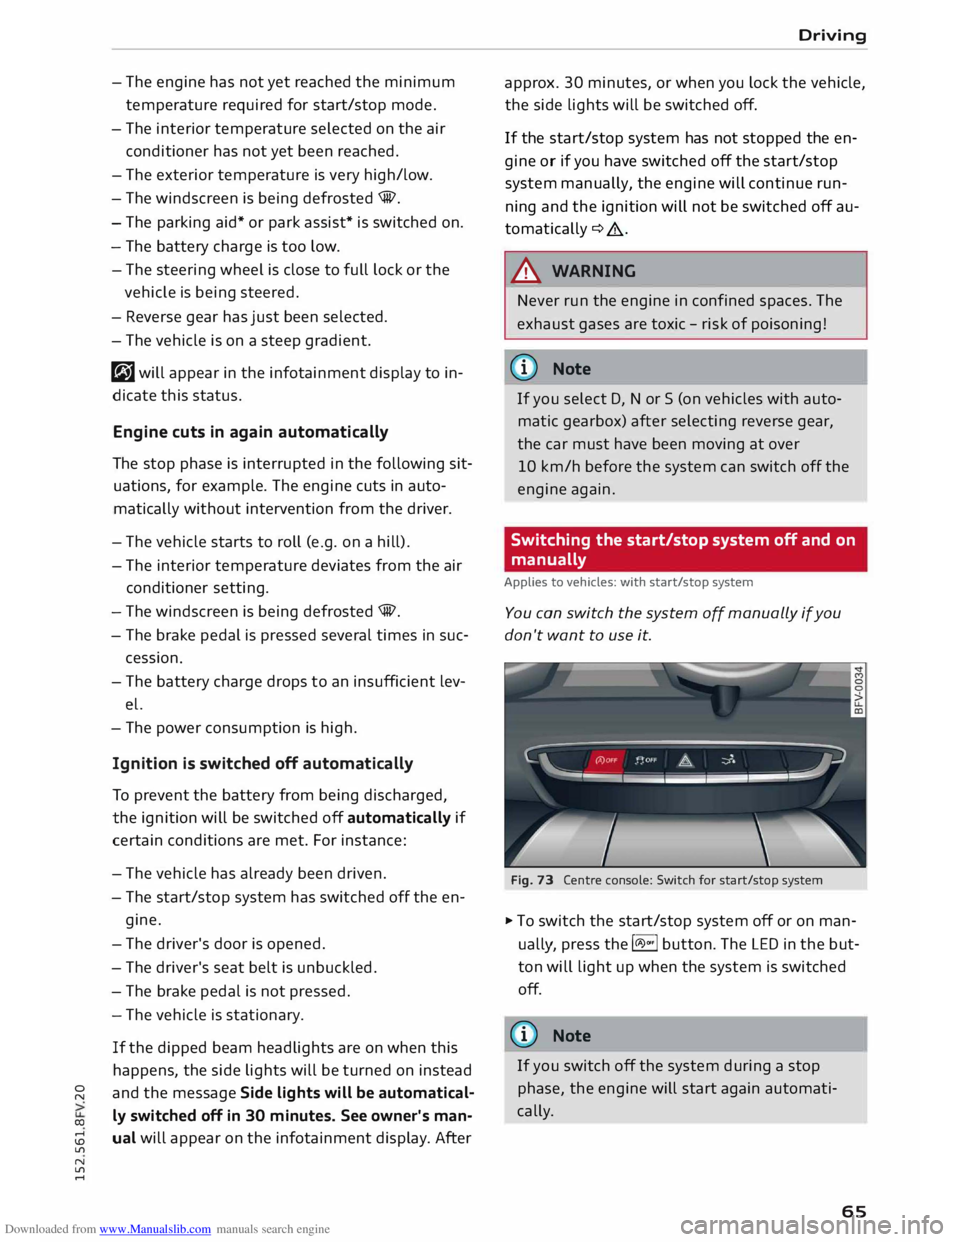 AUDI TT COUPE 2014  Owners Manual Downloaded from www.Manualslib.com manuals search engine 0 
N 
co 
.... 
\D  L/'l 
N 
L/'l 
....  -
The  engine  has not yet reached  the minimum
temperature  required for start/stop  mode.
- 